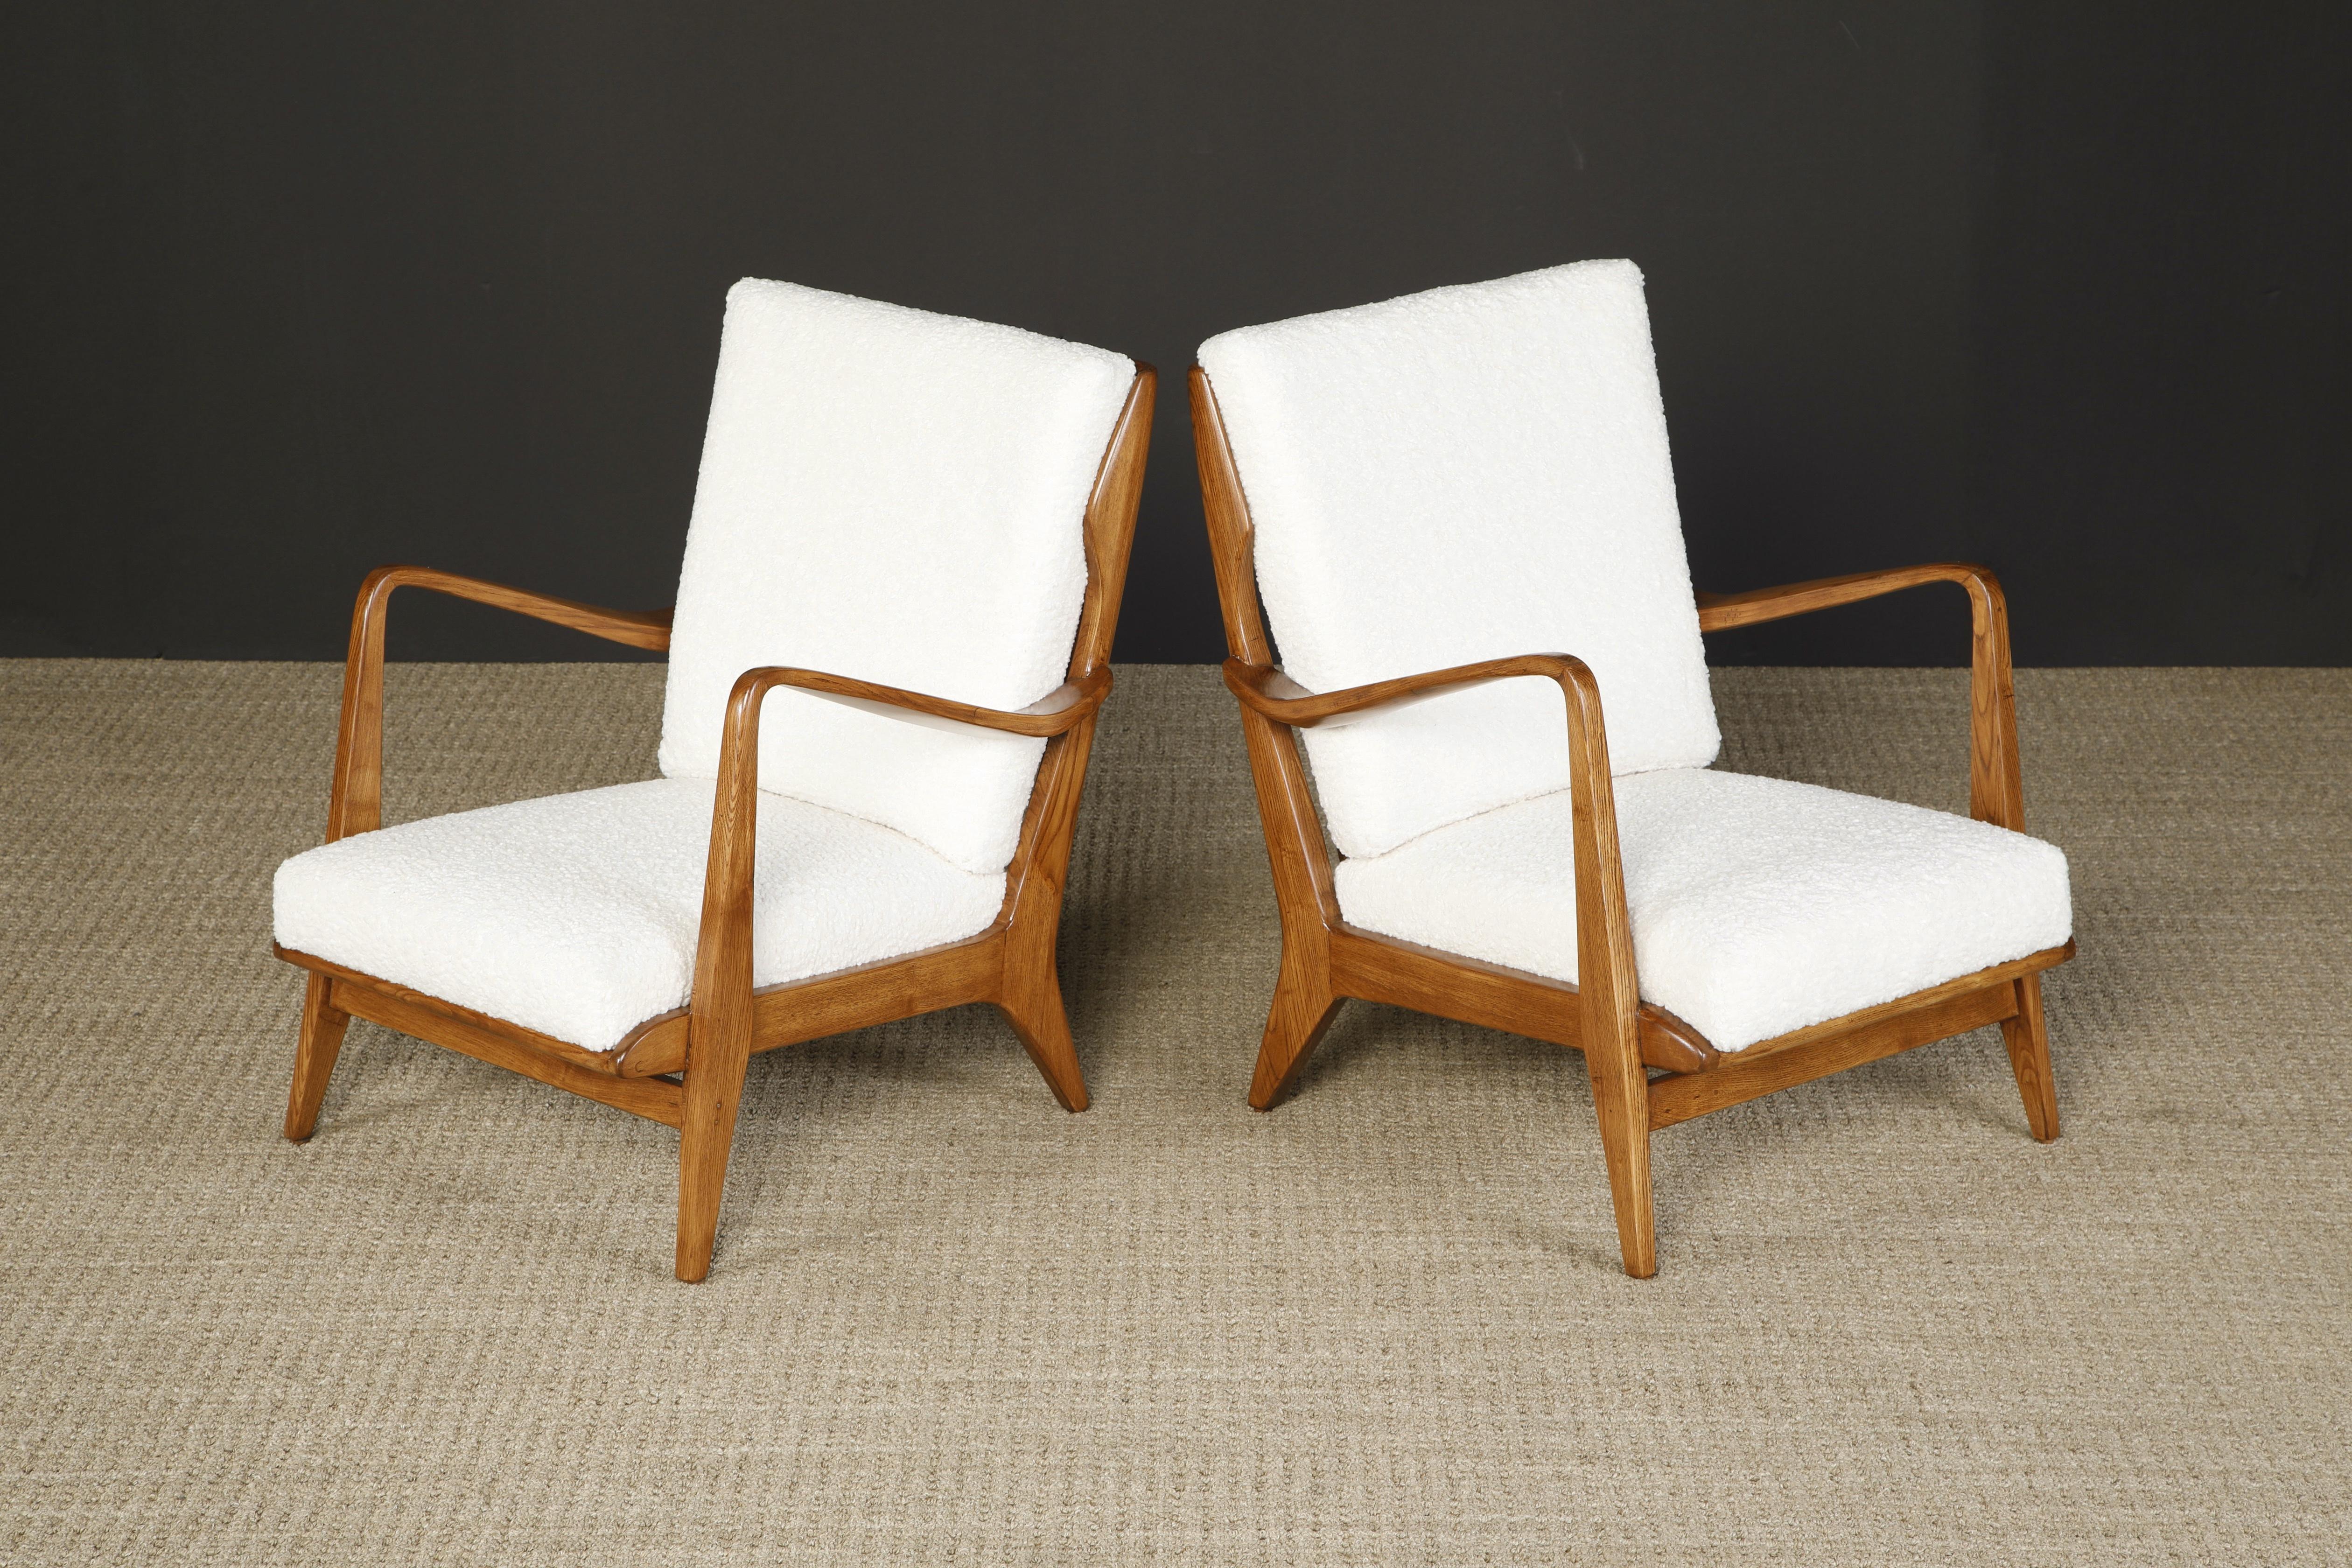 Italian Gio Ponti for Cassina Lounge Armchairs, Refinished & Reupholstered, Italy 1950s